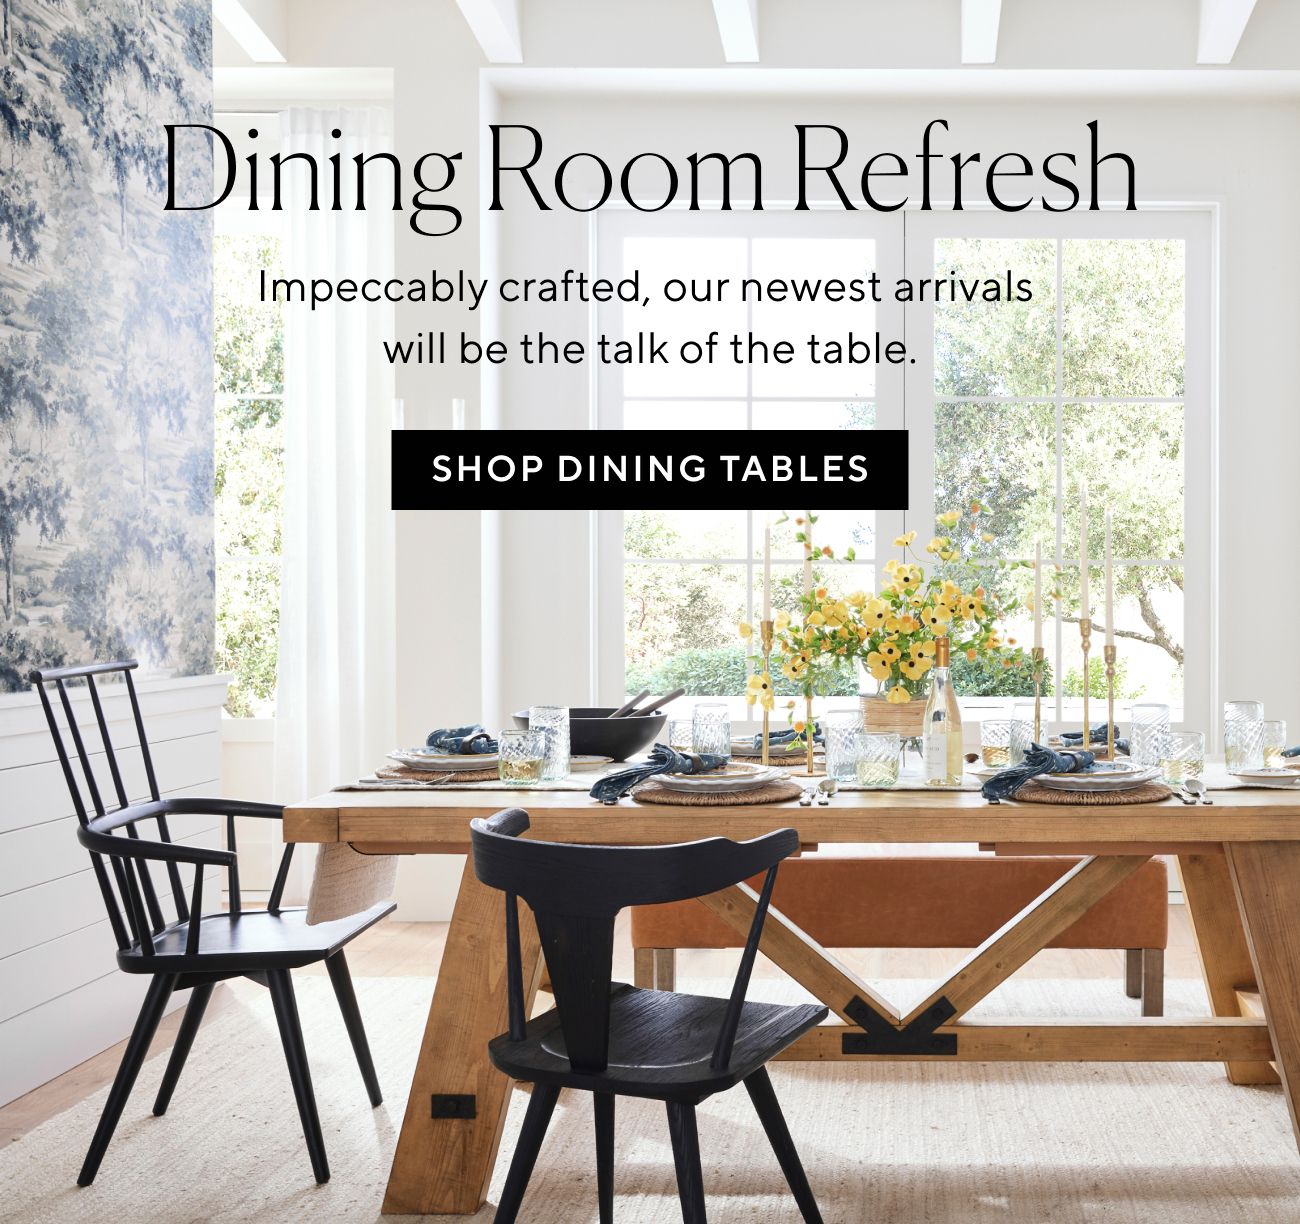 1 Dining Room Refresh Impeccably crafted, our newest arrivals will be the talk of the table. TN R 